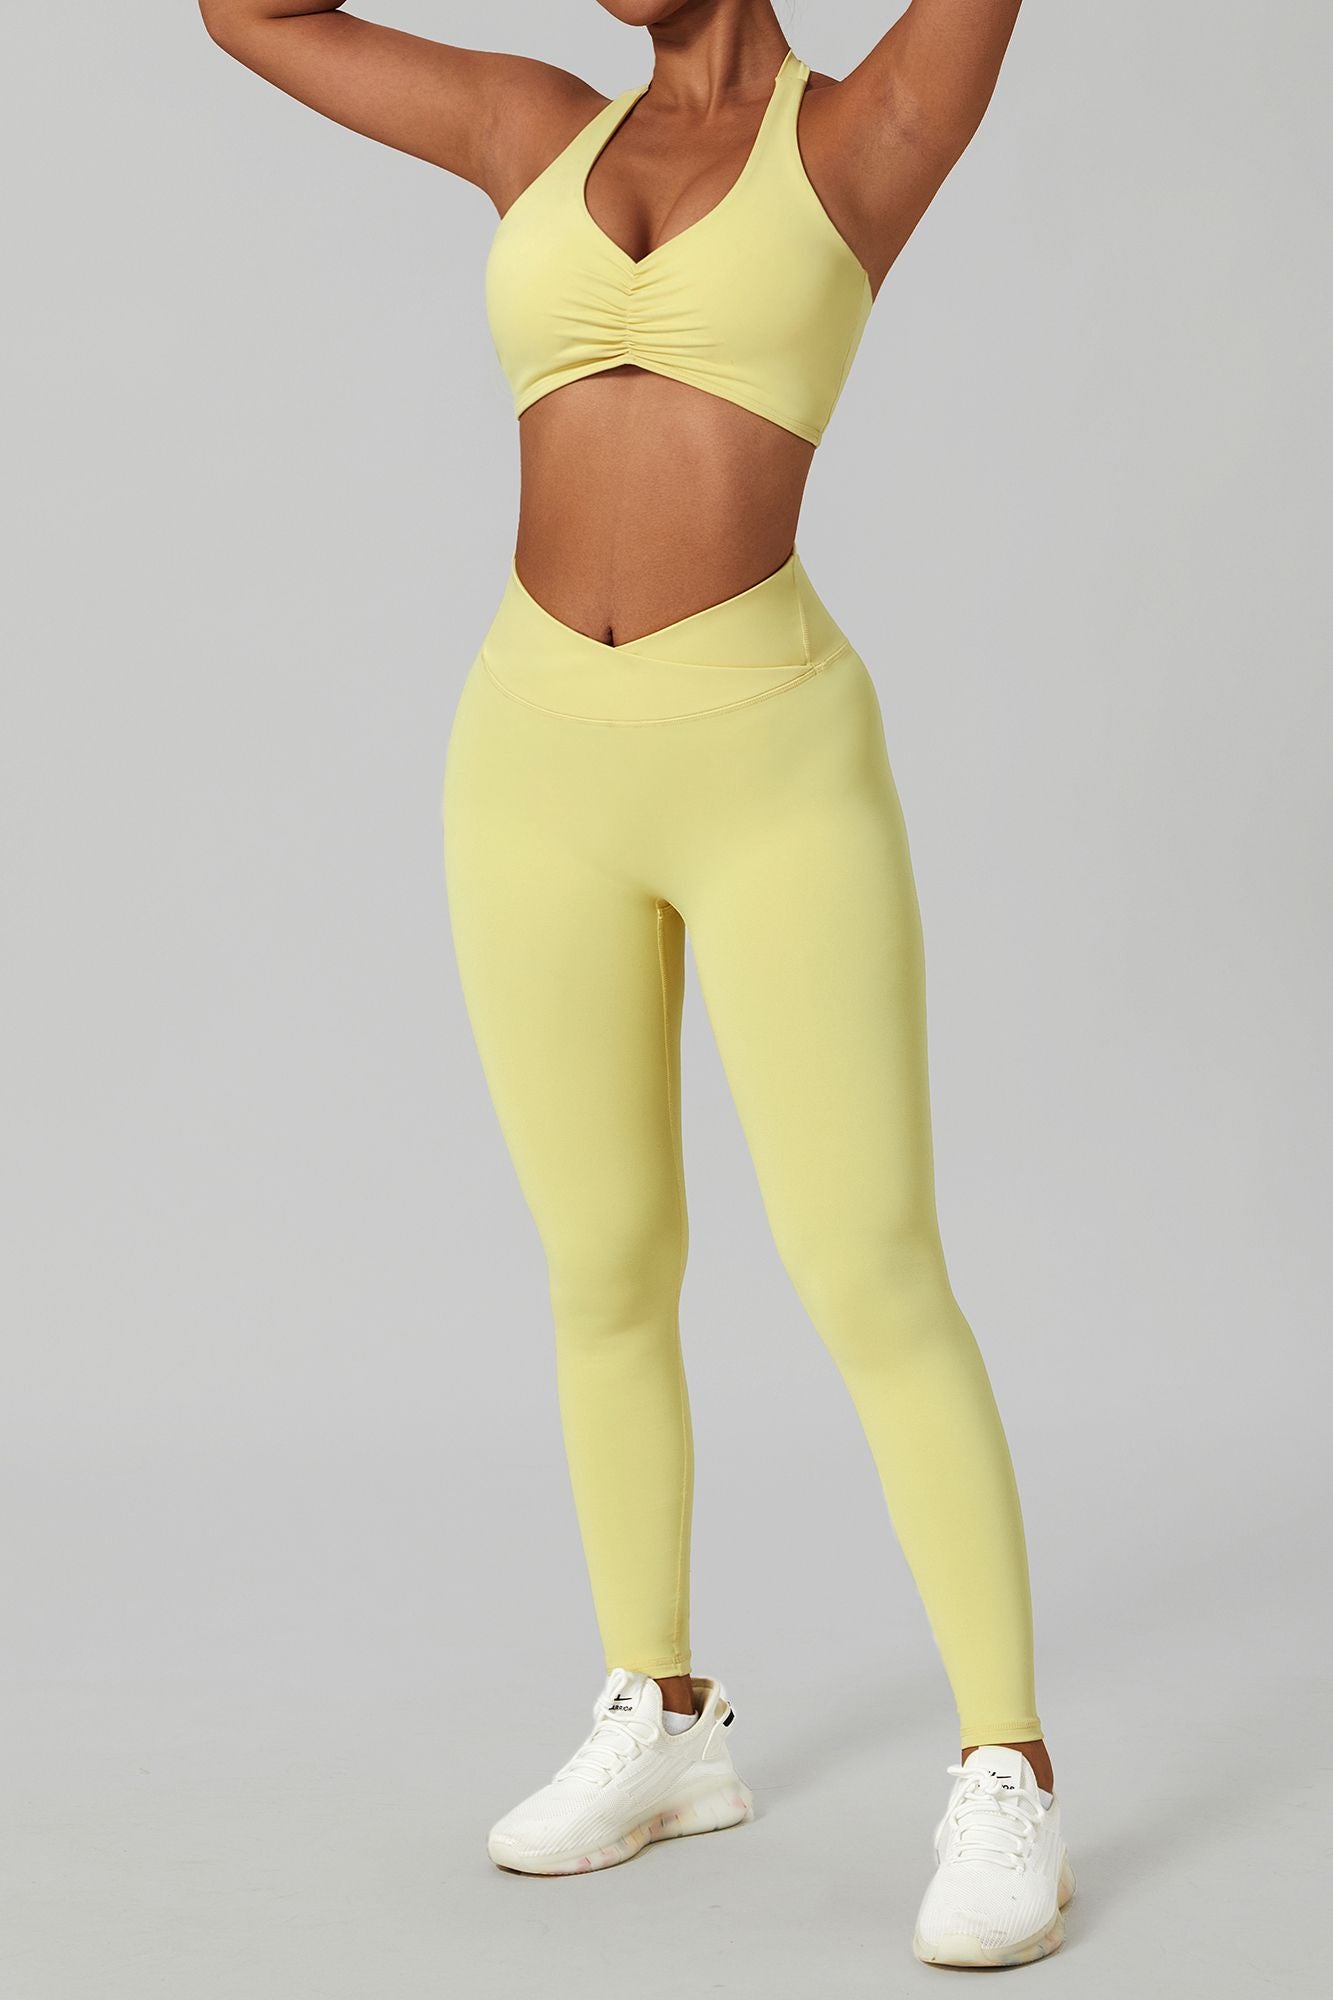 Be Fit Love Strength Faith with Yellow Trim Scrunch Butt Shorts and Bra Top  Set - Be Fit Apparel